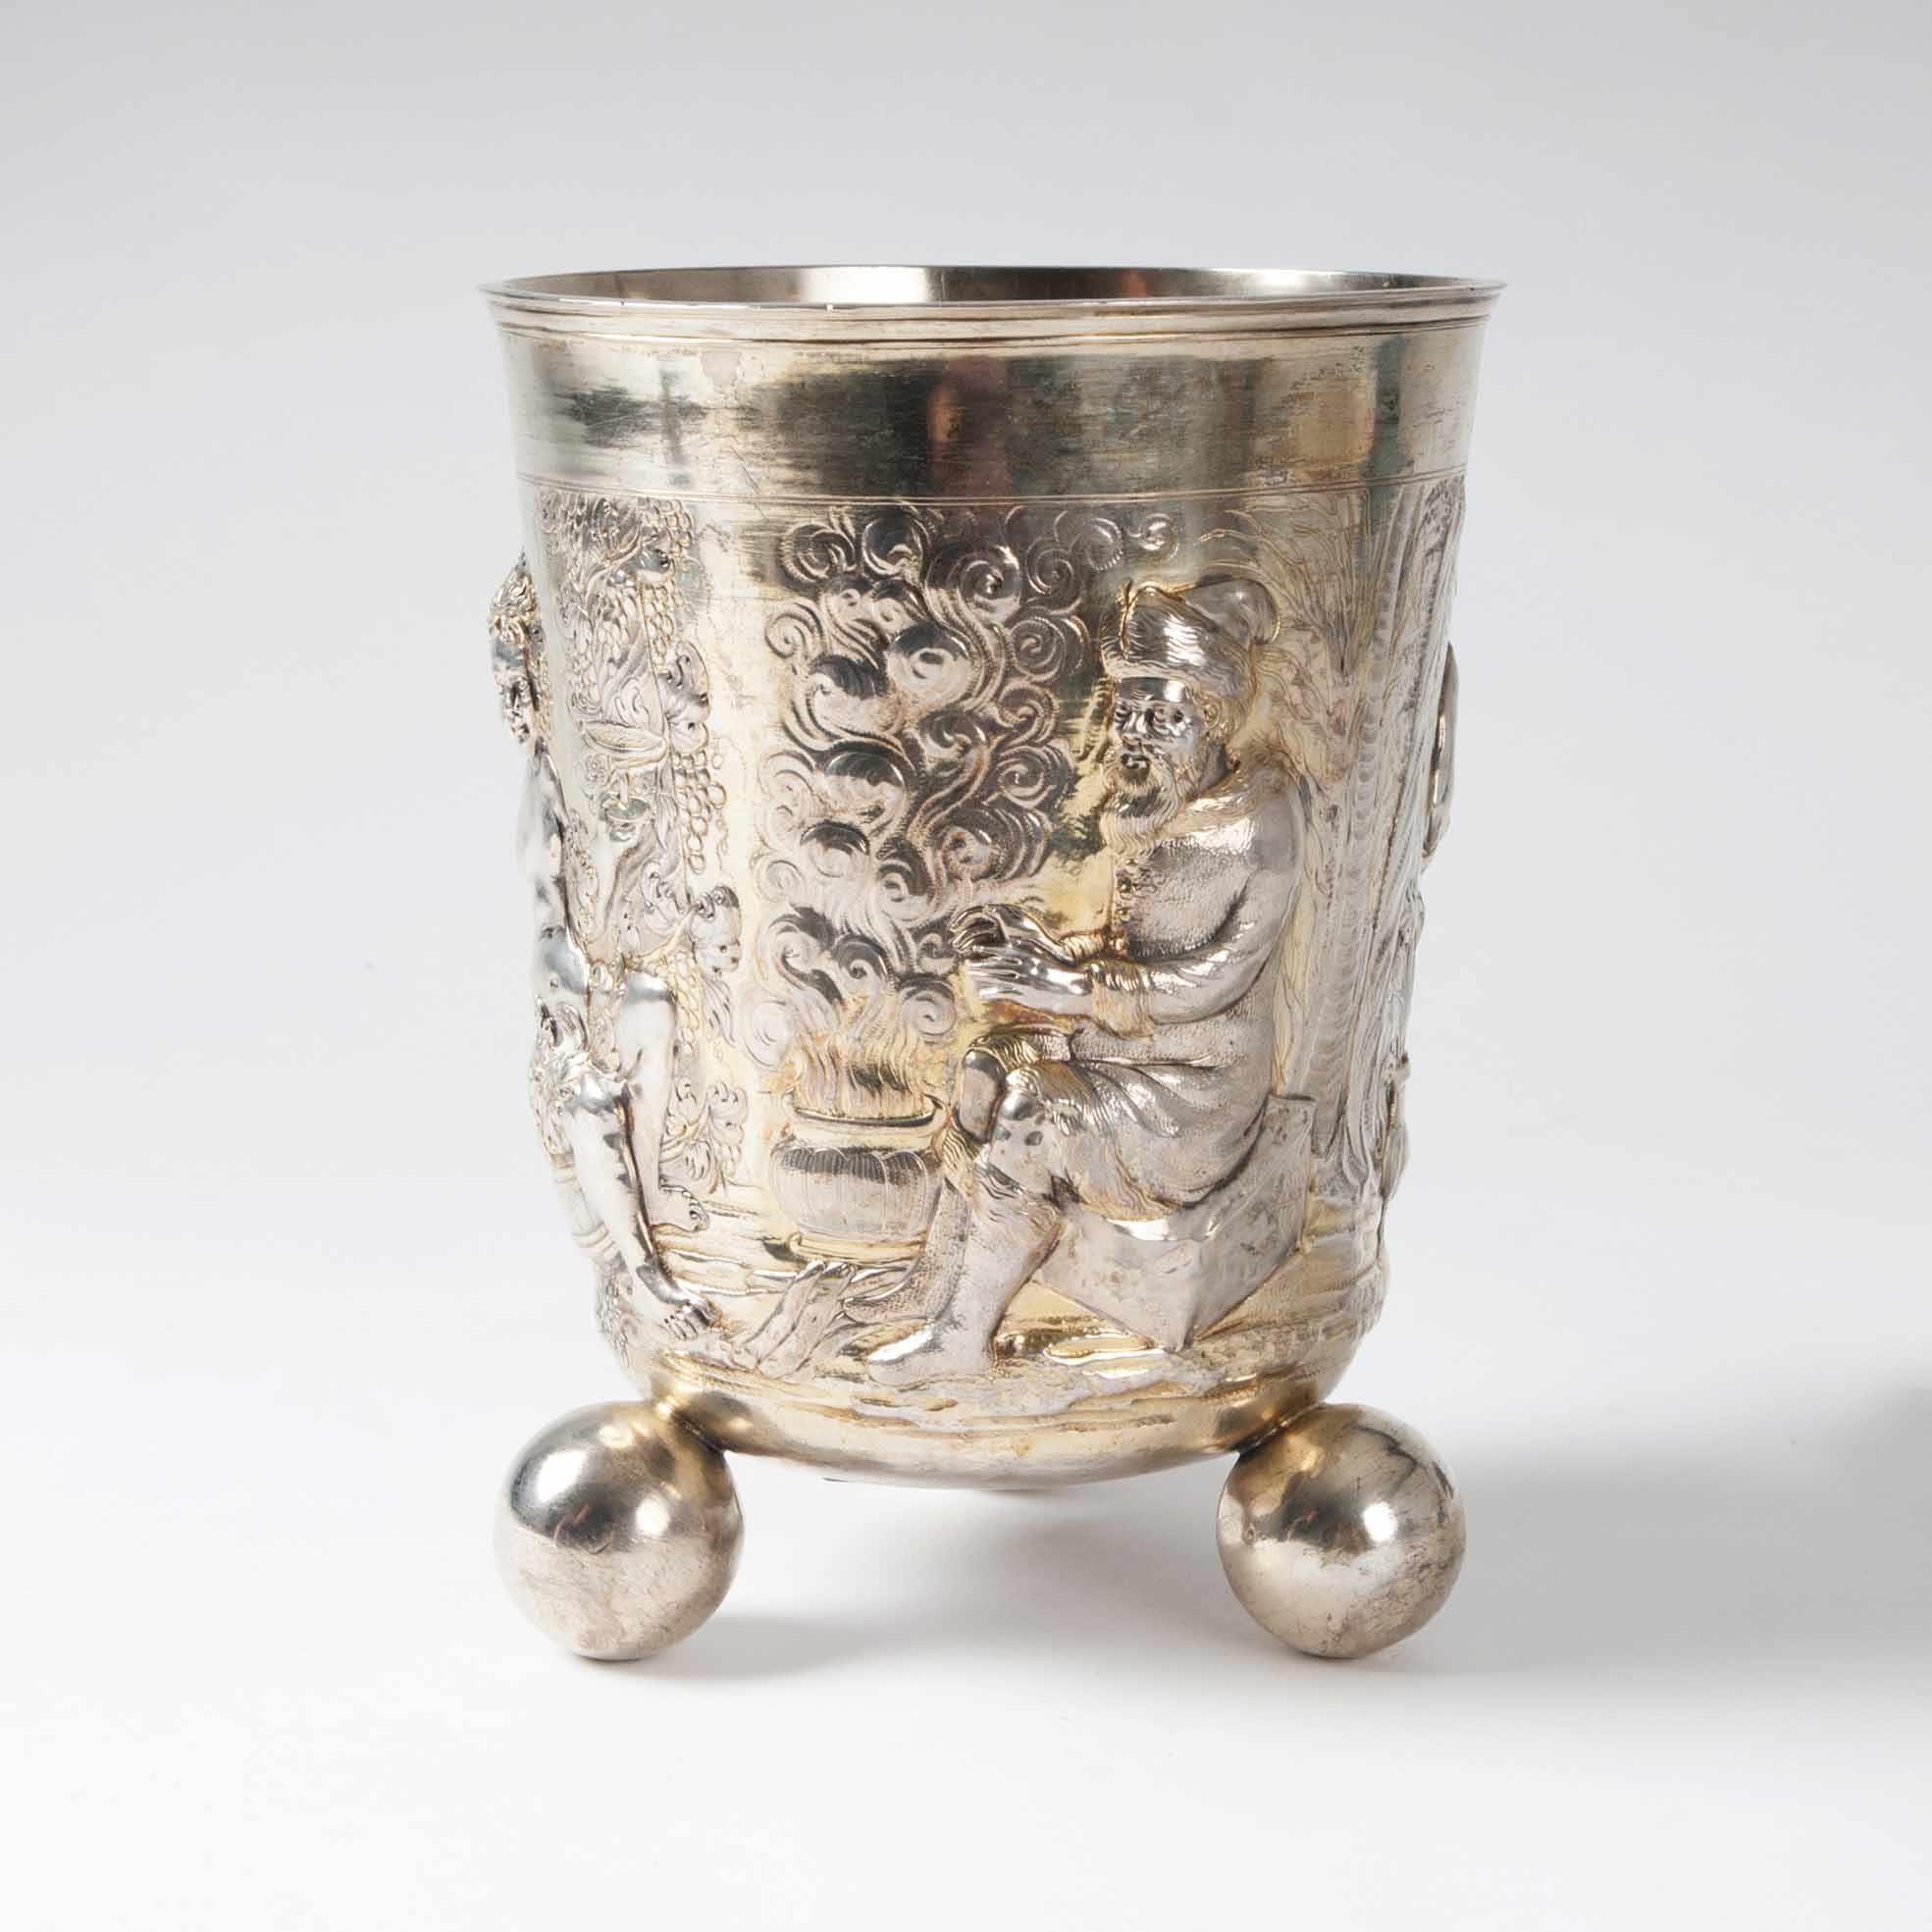 A museum-like grand beaker with chased allegory of the four seasons - image 2